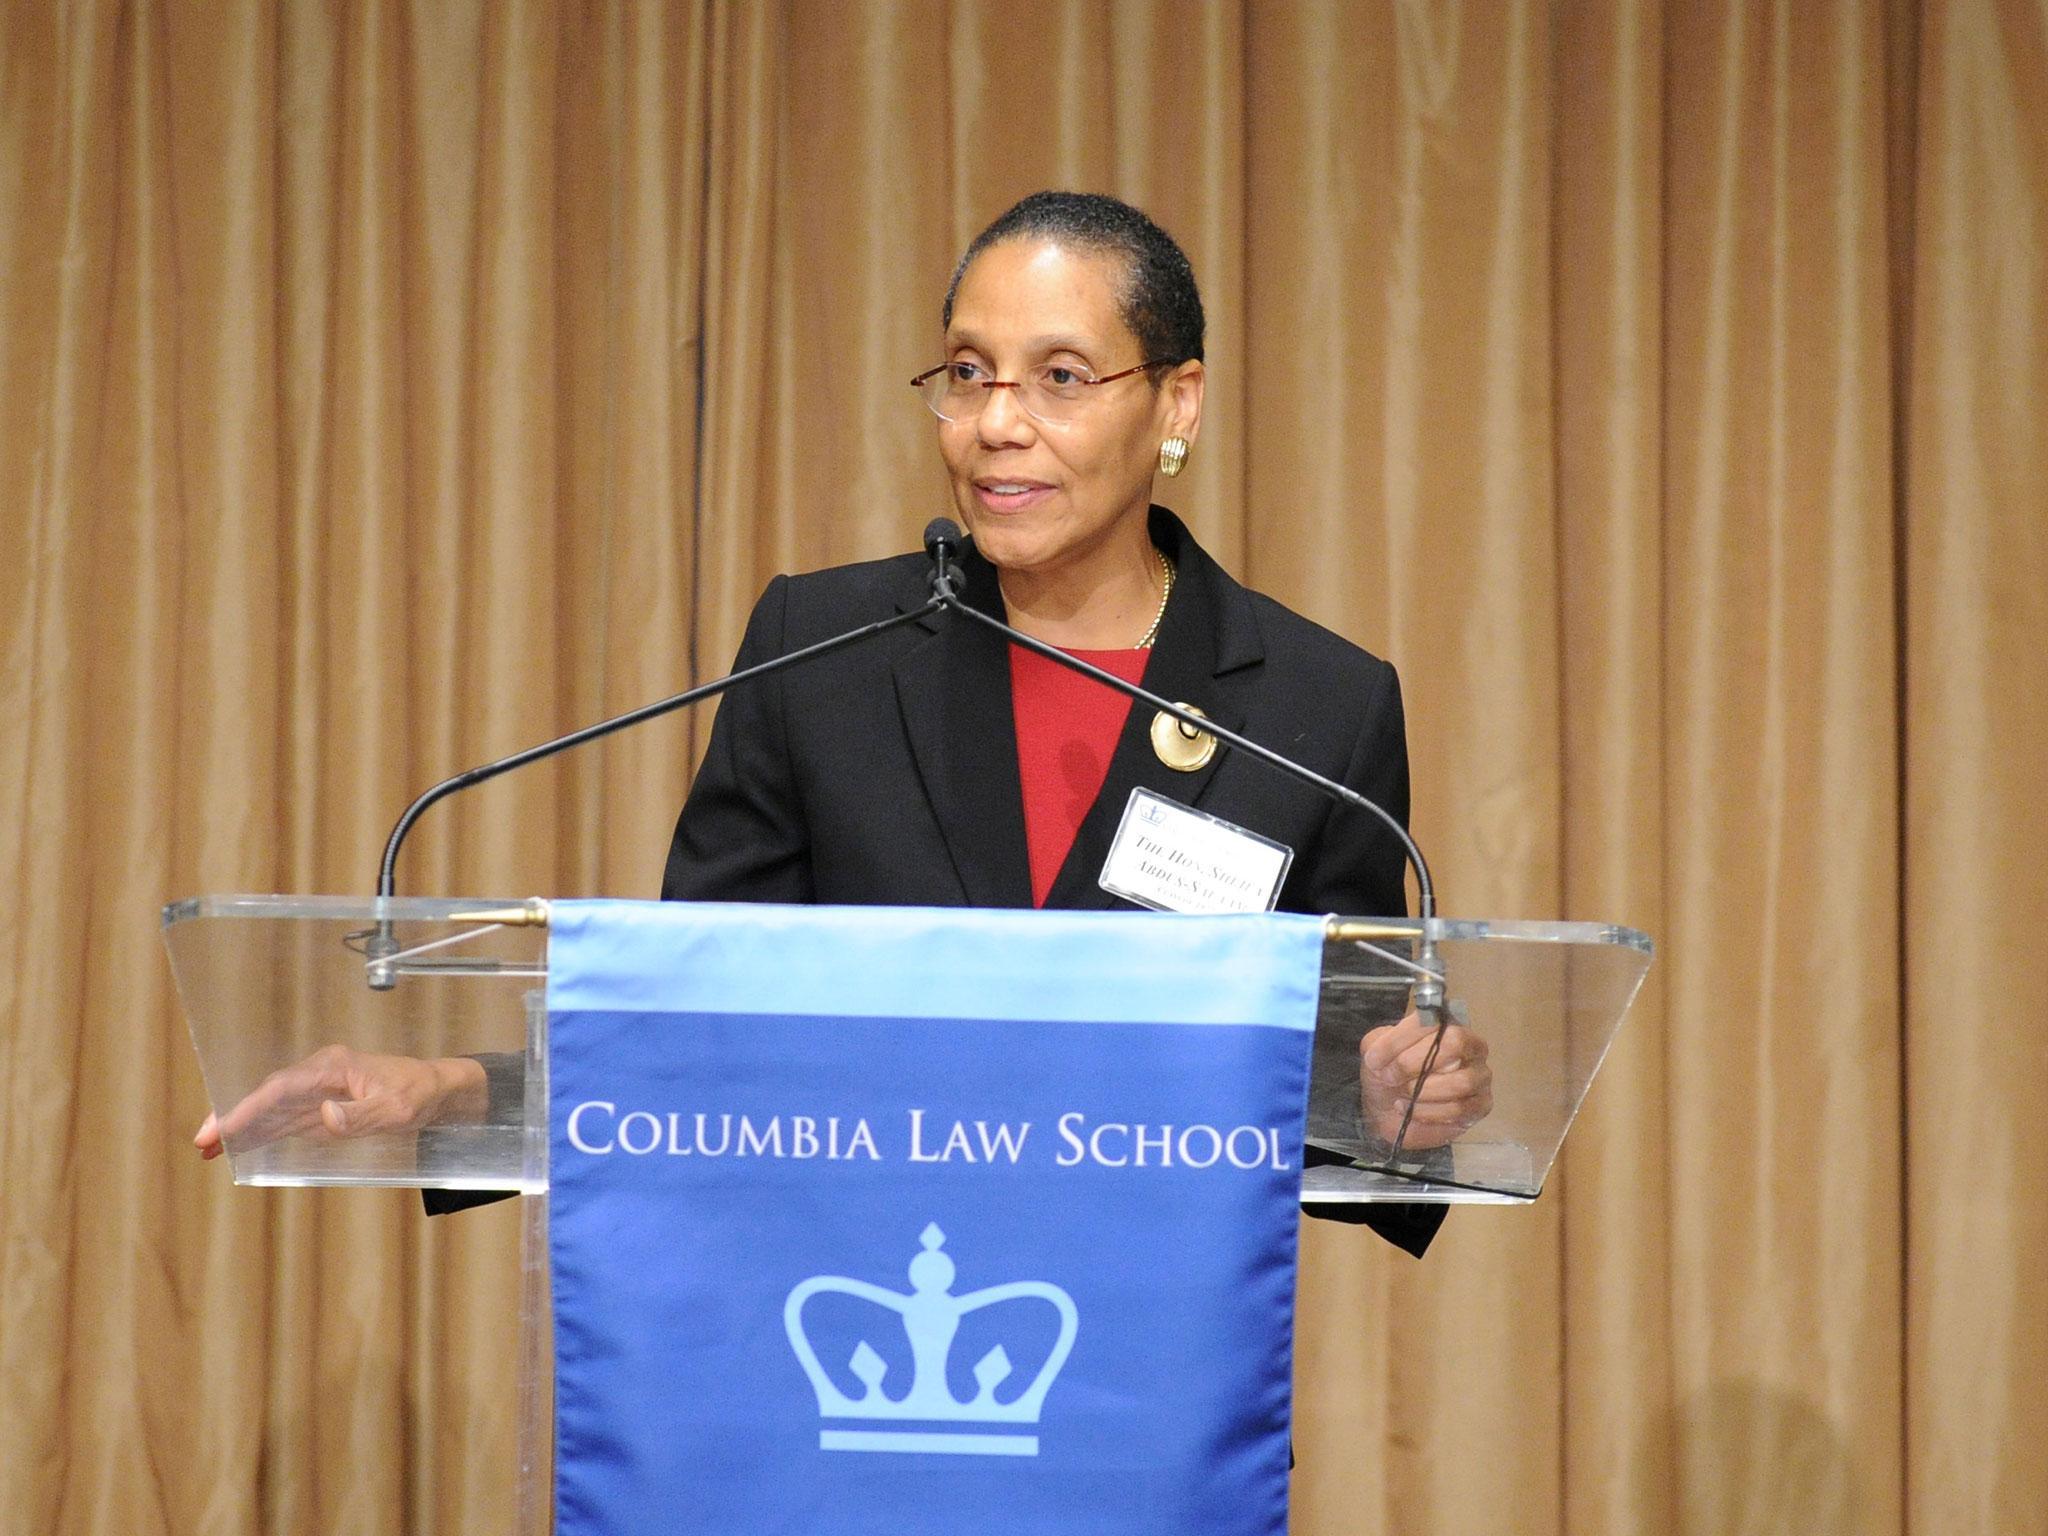 Judge Sheila Abdus-Salaam, associate judge of the Court of Appeals, who was found dead in New York's Hudson River